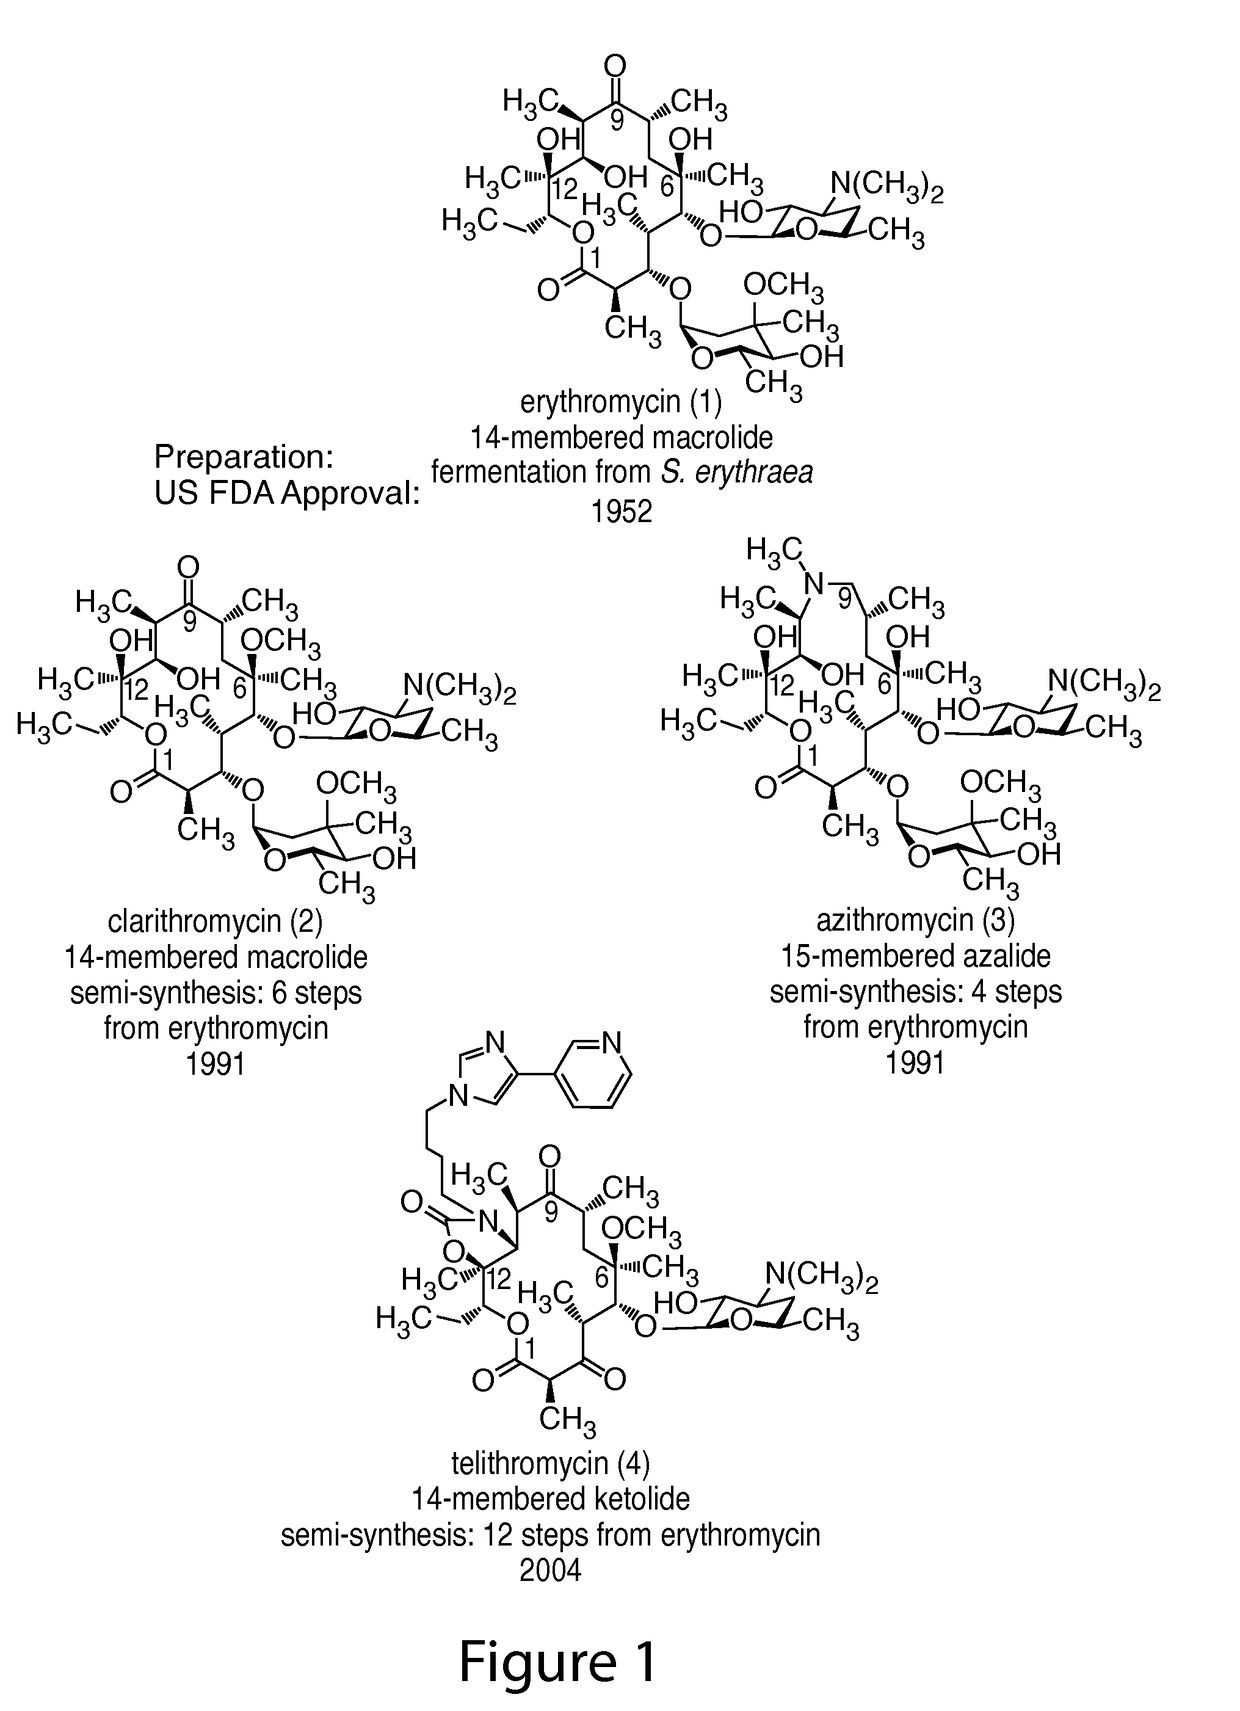 14-membered ketolides and methods of their preparation and use